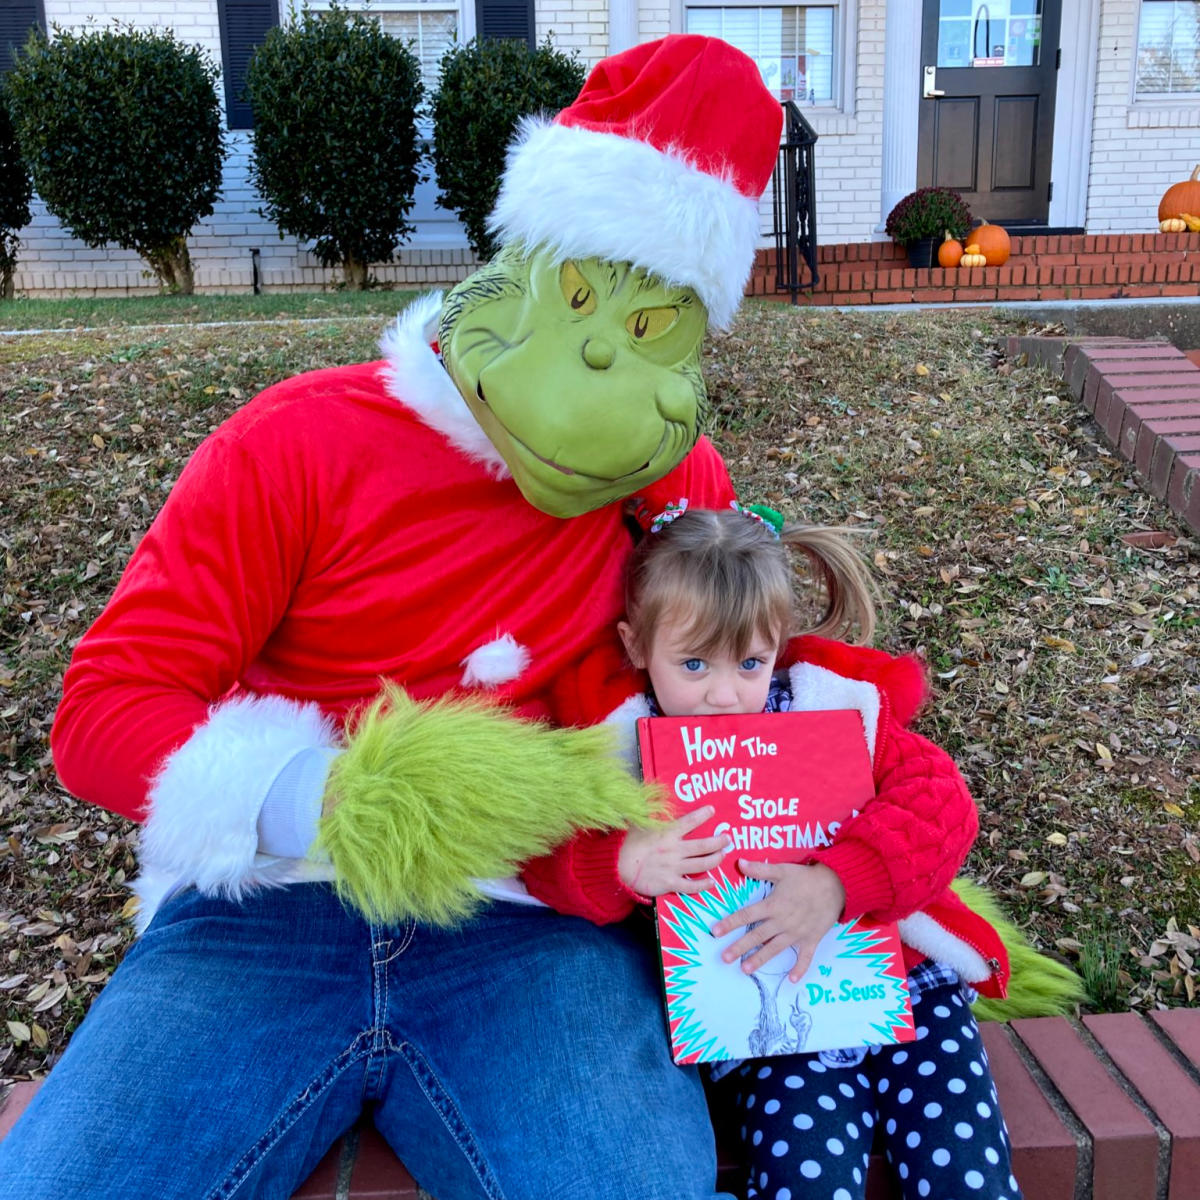 A little girl holds her "How the Grinch Stole Christmas" book while getting her photo with the Grinch himself at the annual Holiday Hop in Travelers Rest, SC.